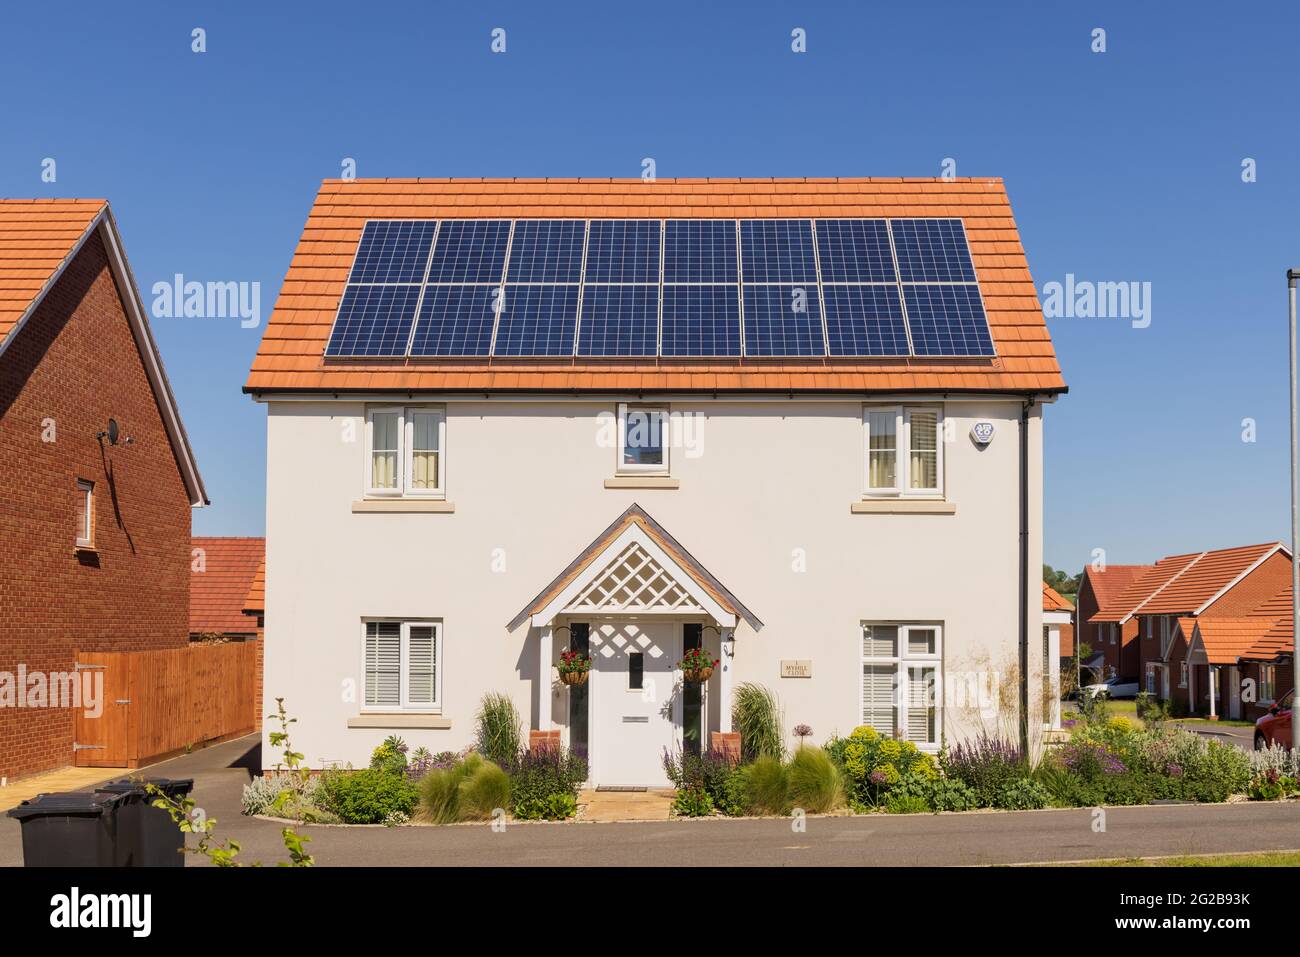 Detached new build home with solar panels on the roof. UK Stock Photo